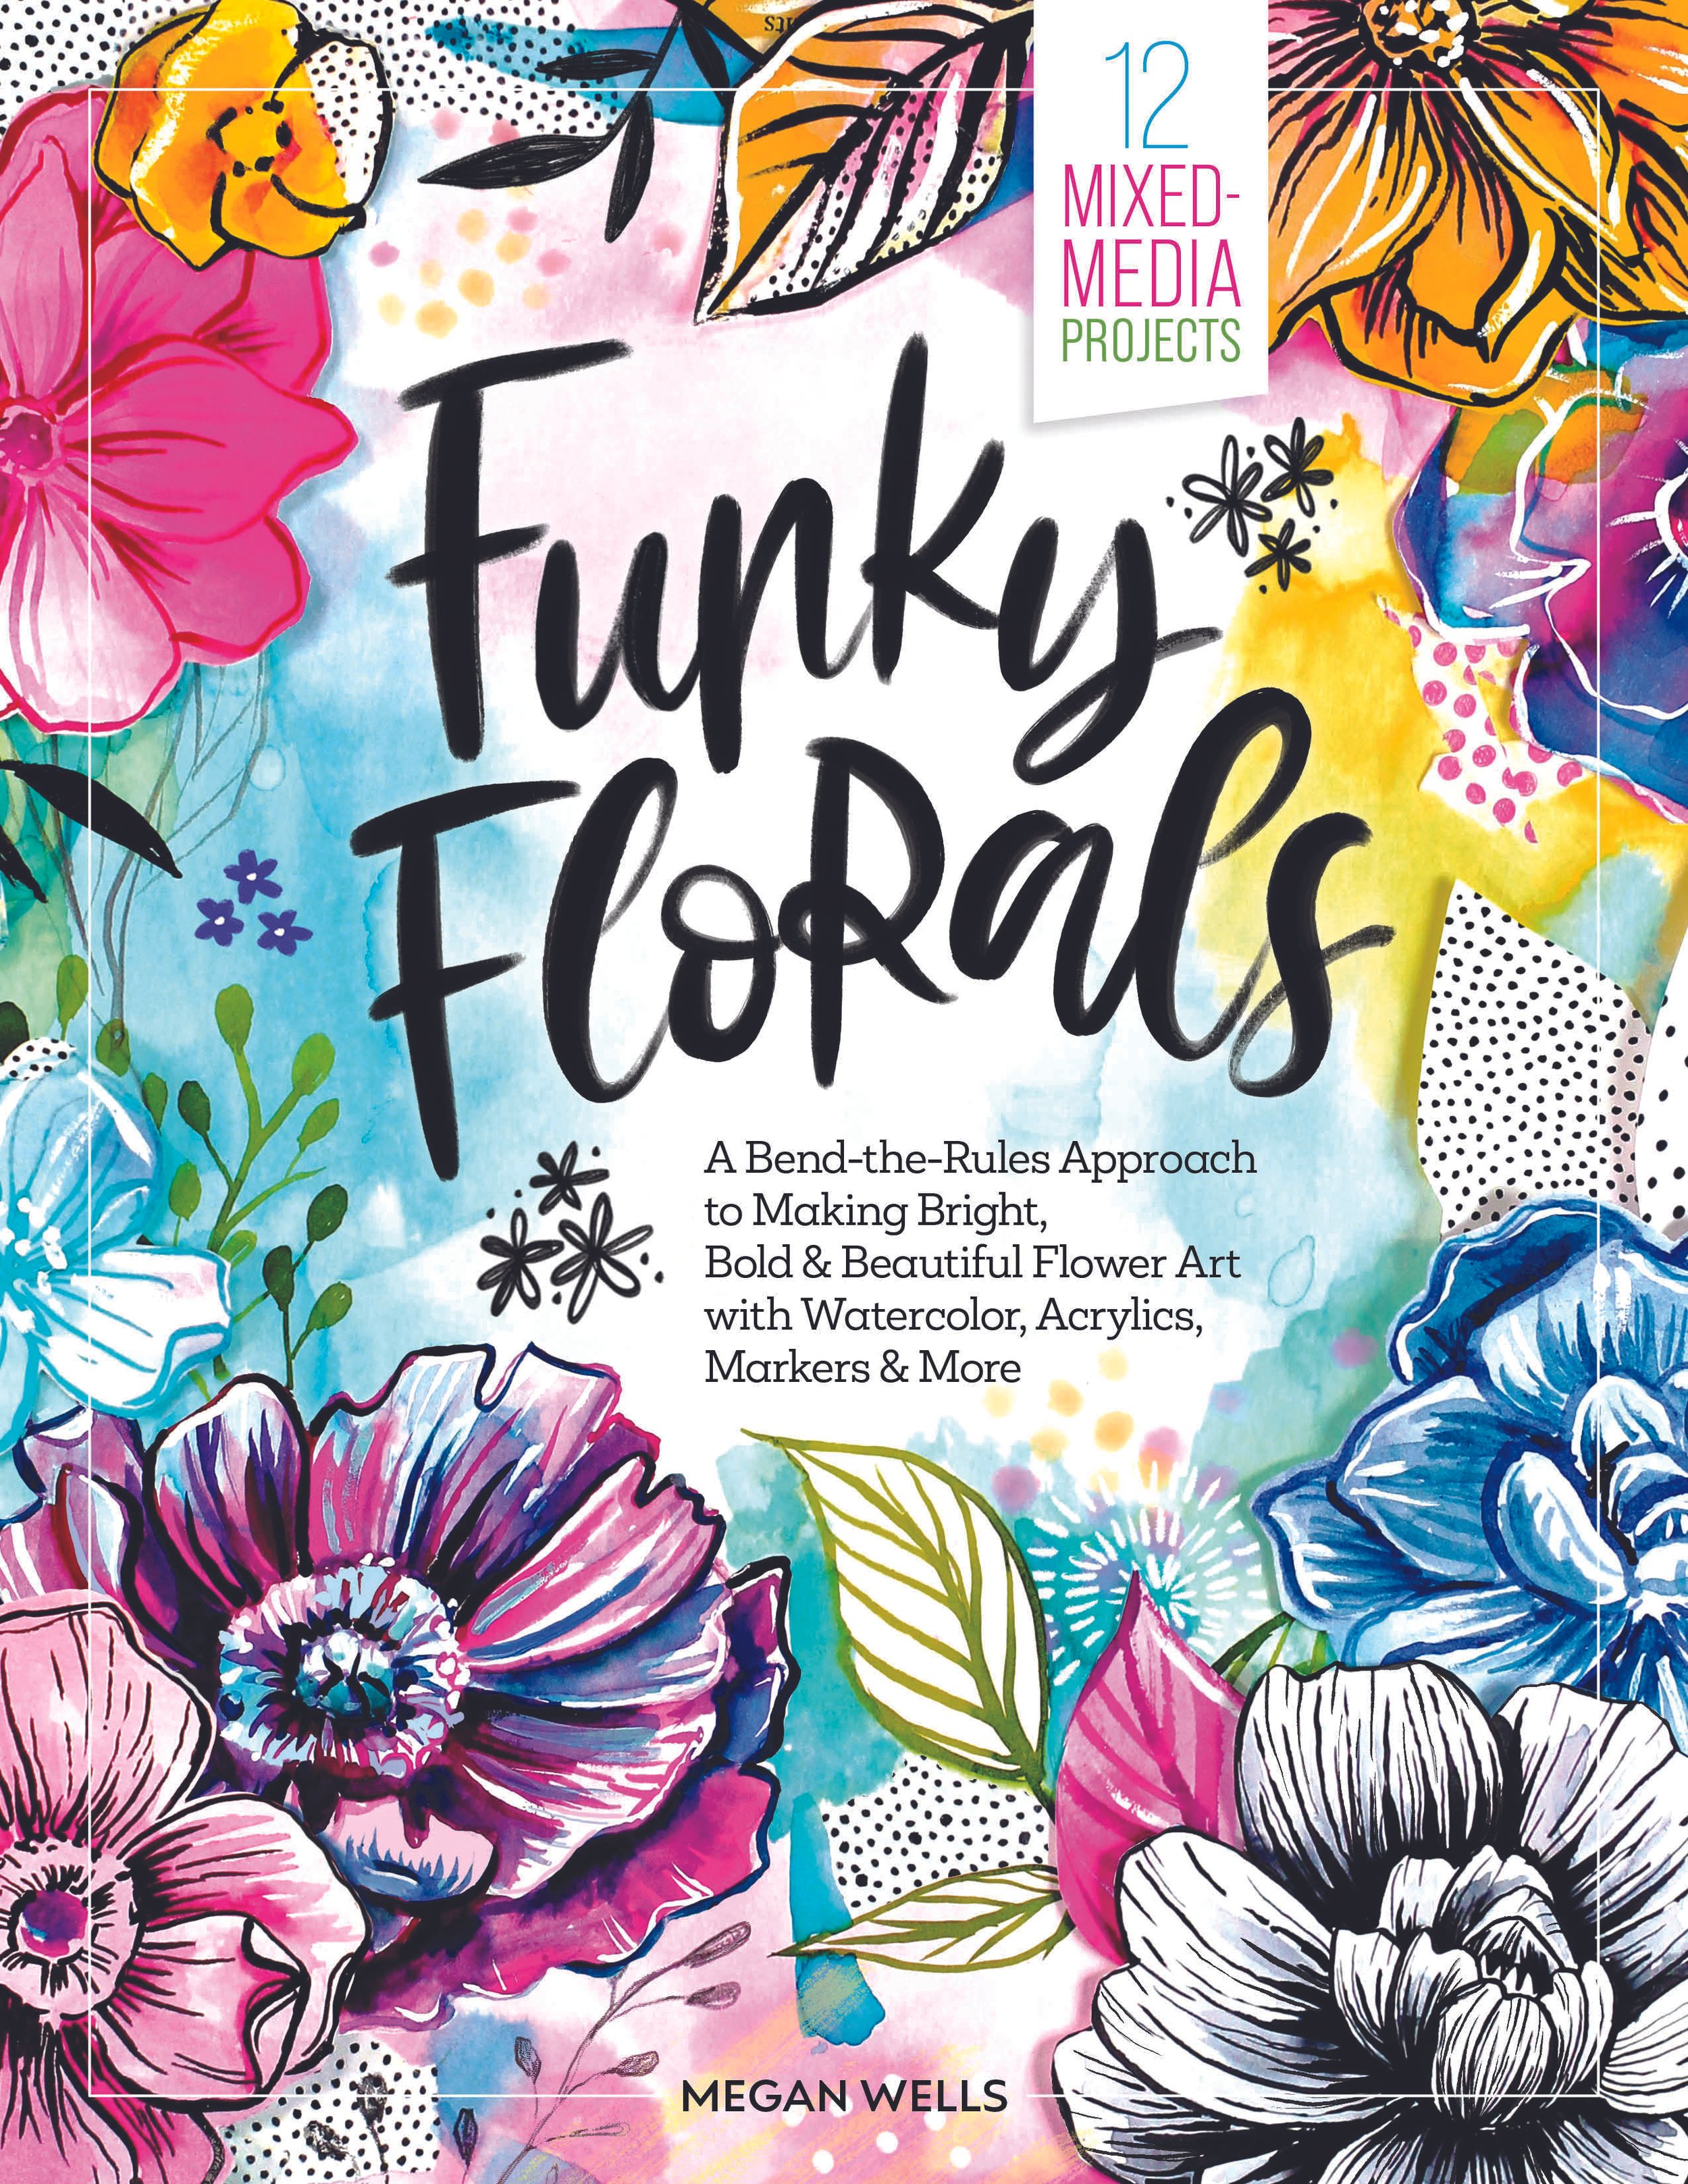 Funky Florals_Cover 978-0-7643-6860-8.jpg